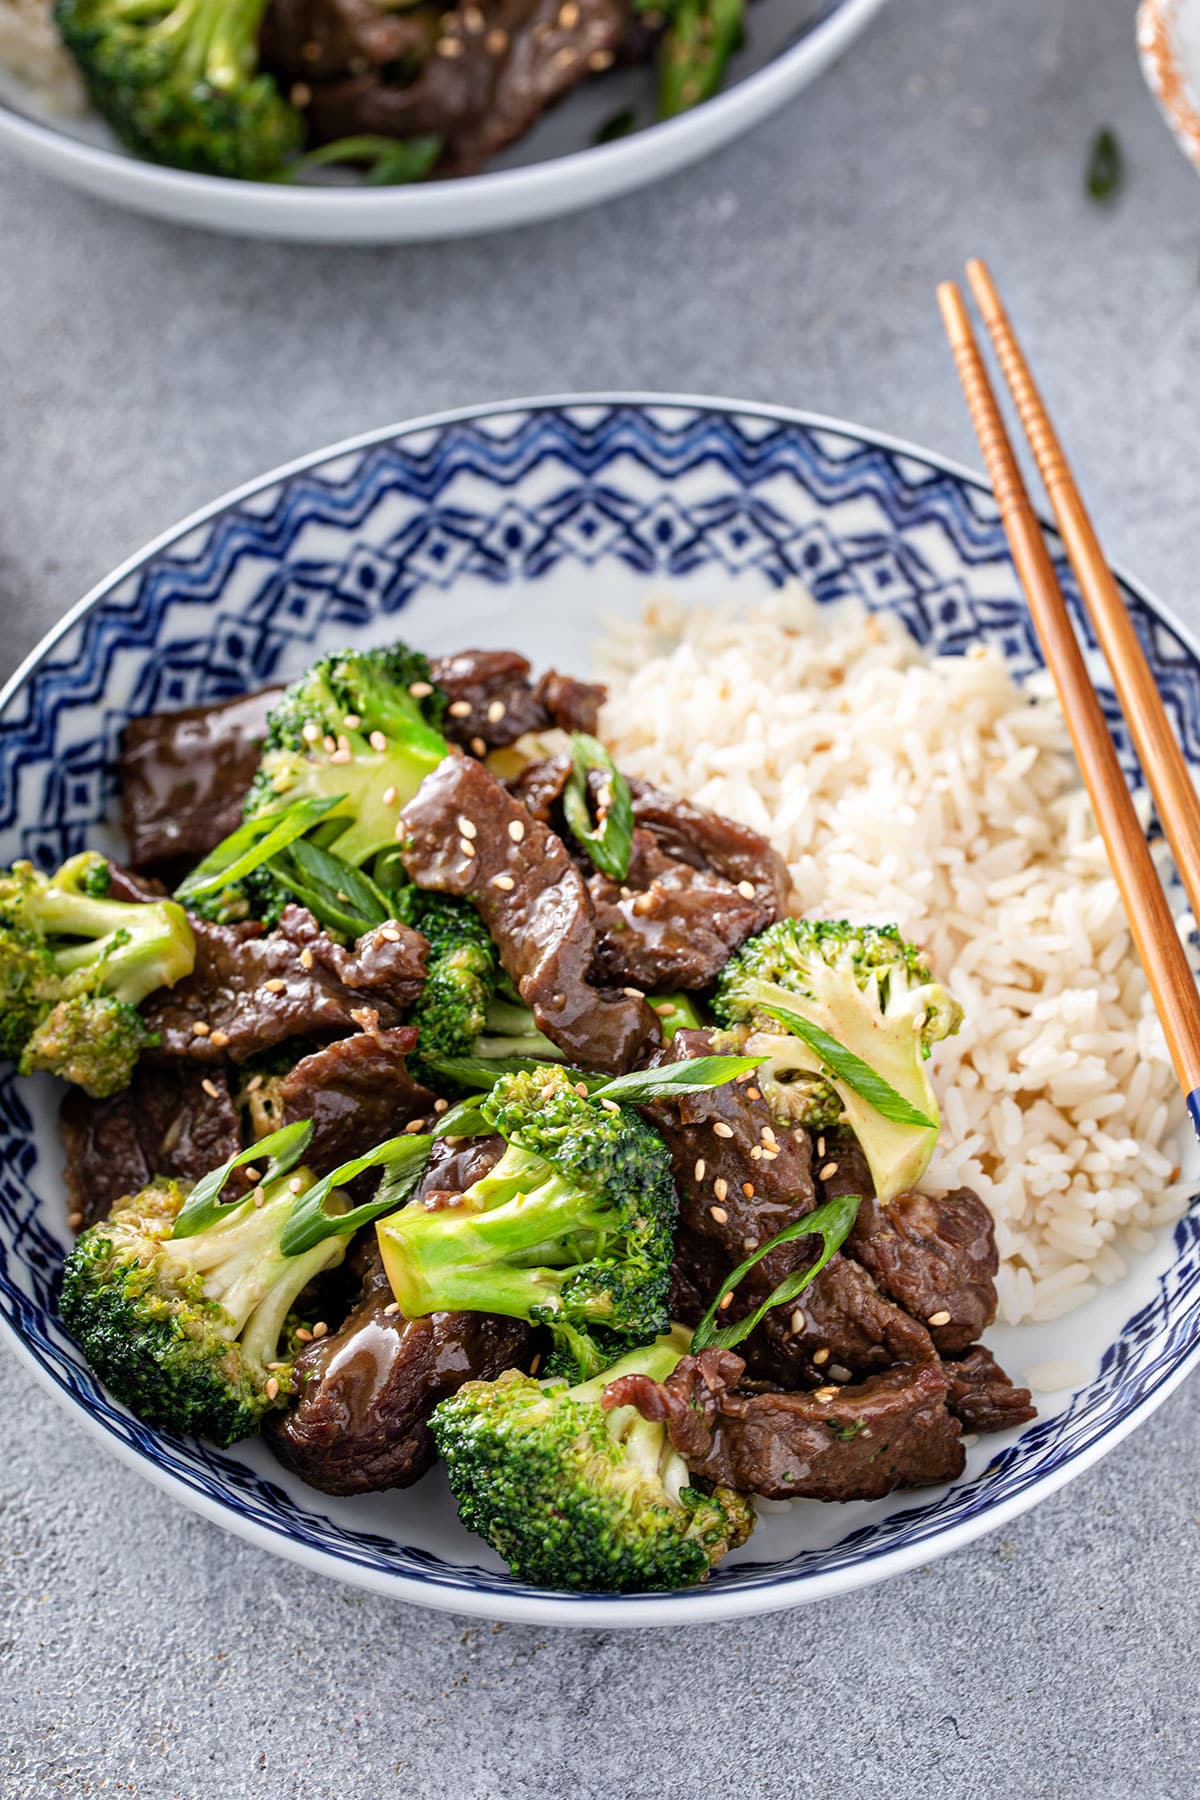 BEEF WITH BROCCOLI RECIPE